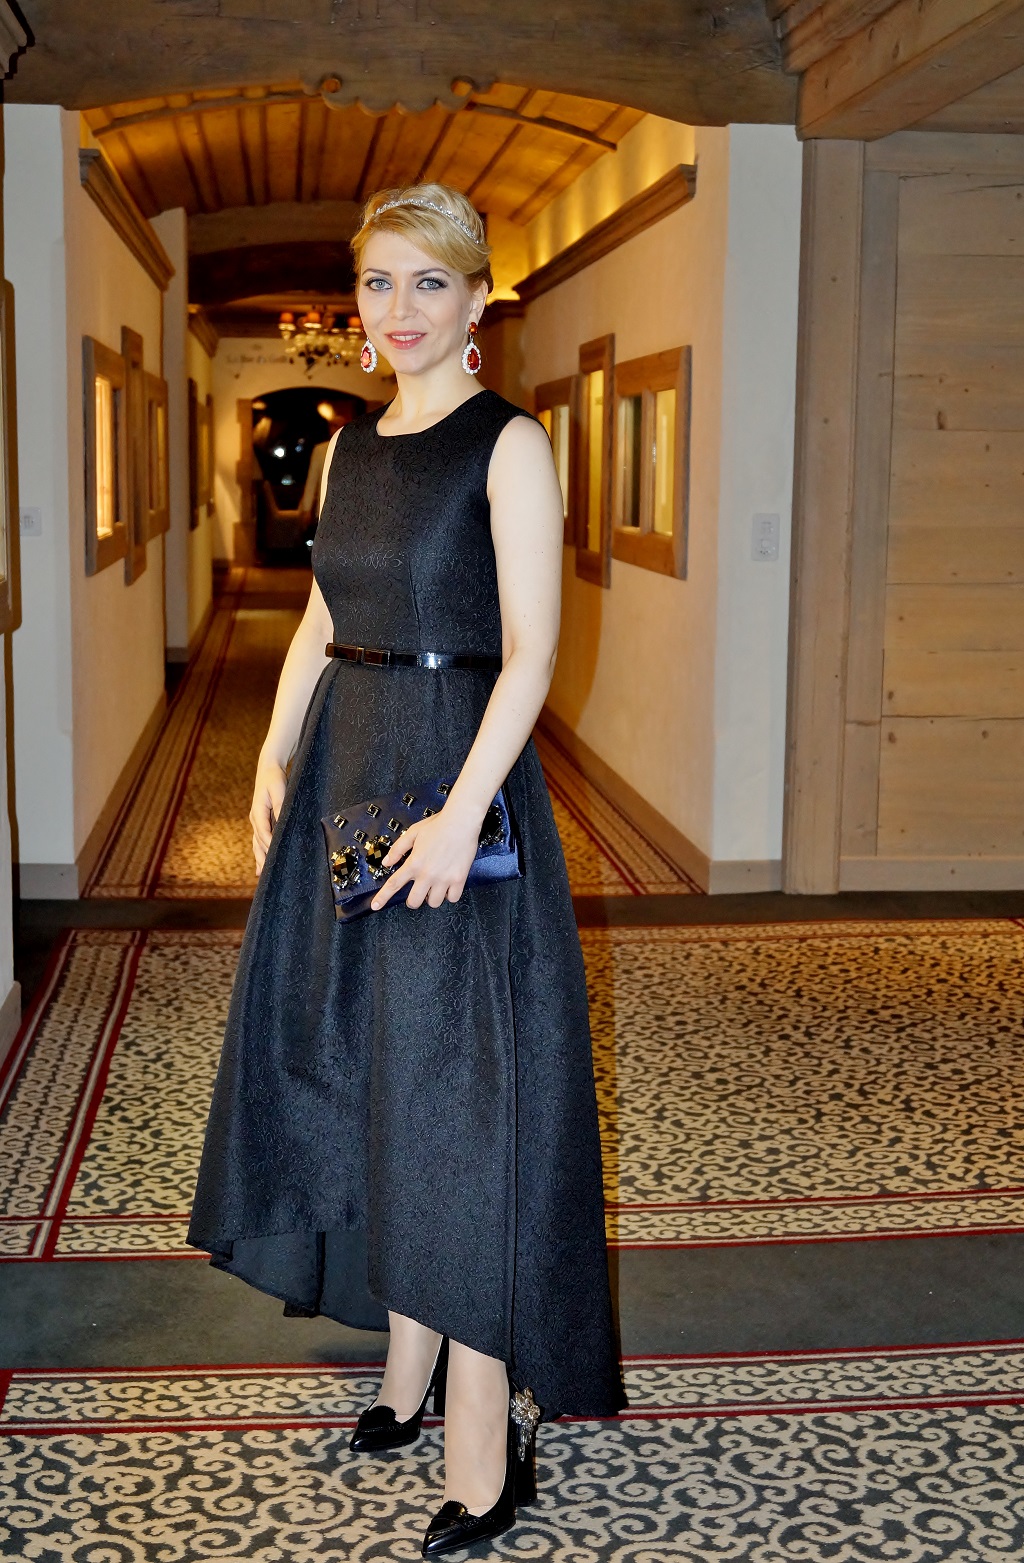 Dress Code Black Tie - Gala Dinner at Gstaad Palace